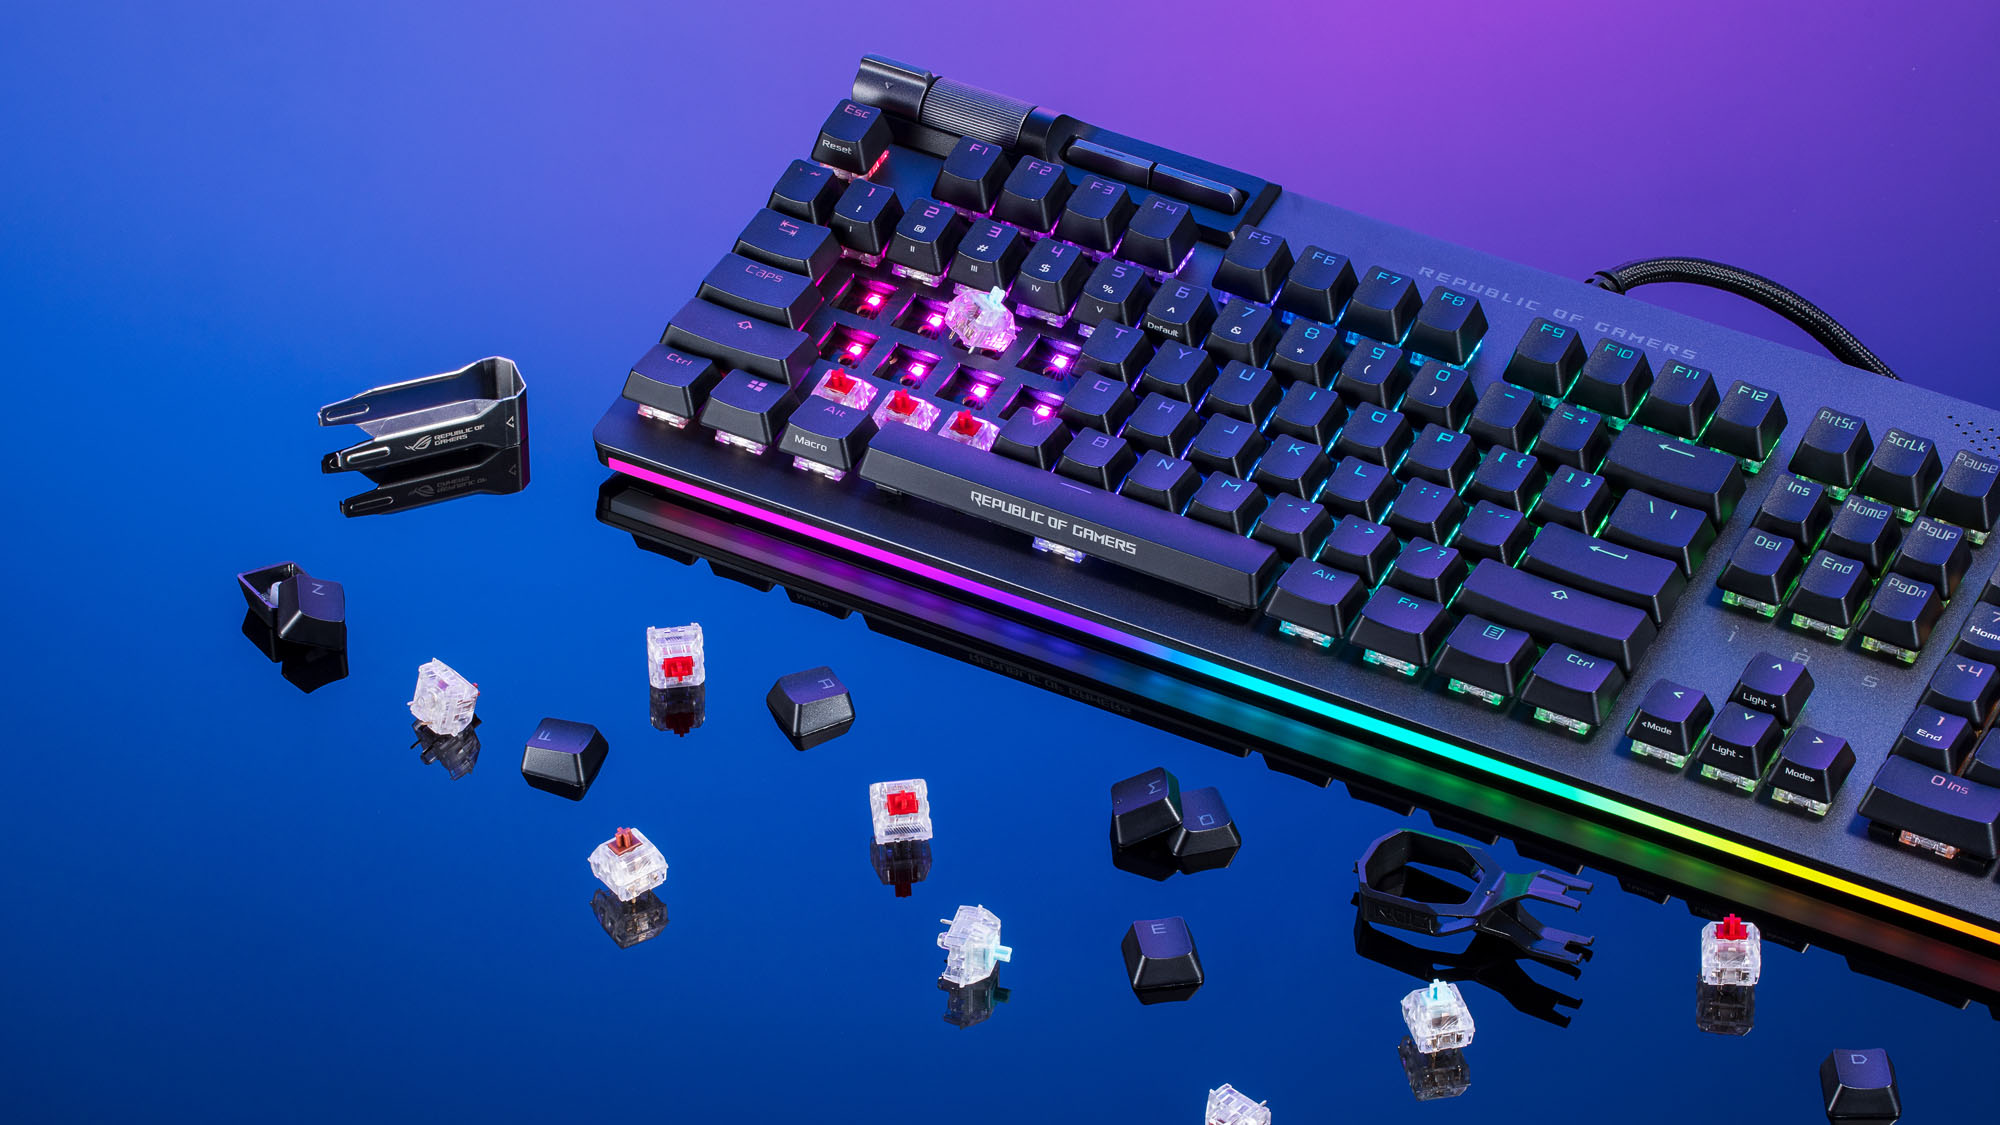 The ROG Strix Flare II And Flare II Animate Mechanical Keyboards Bleed  Quality And Style - BunnyGaming.com